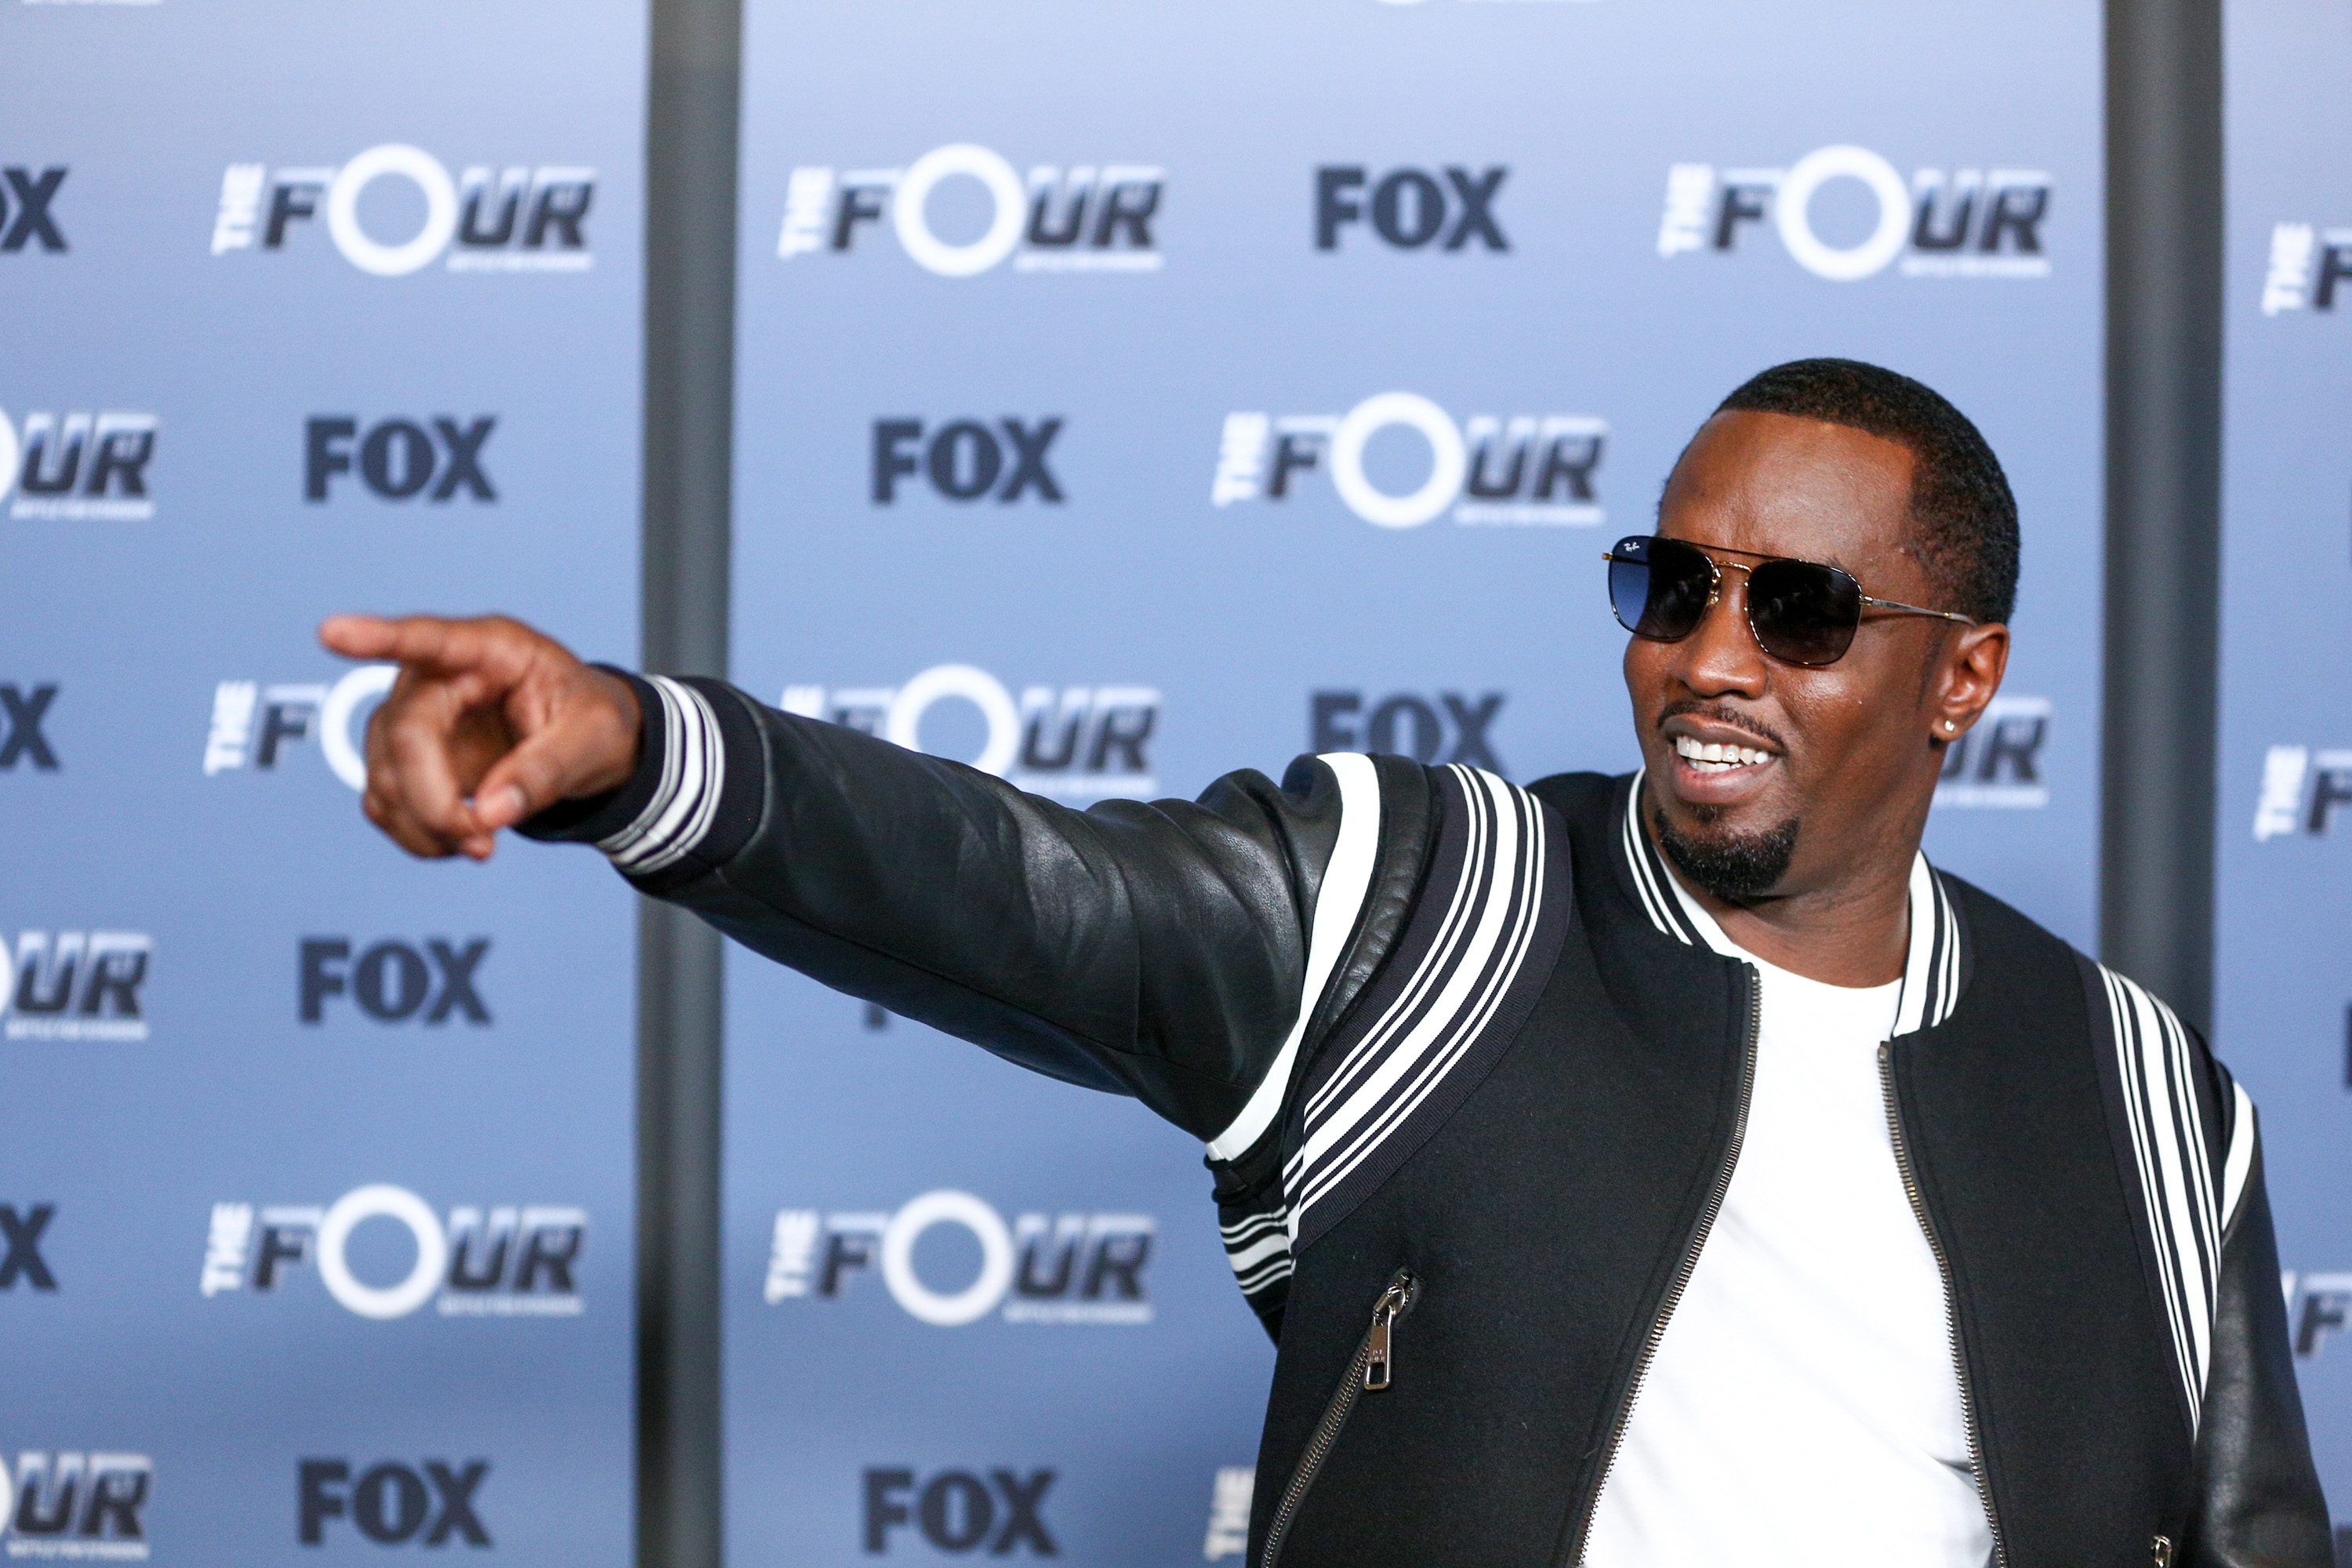 Diddy & Joie Chavis Kiss Explained, She Says It “Shouldn’t Have Happened”